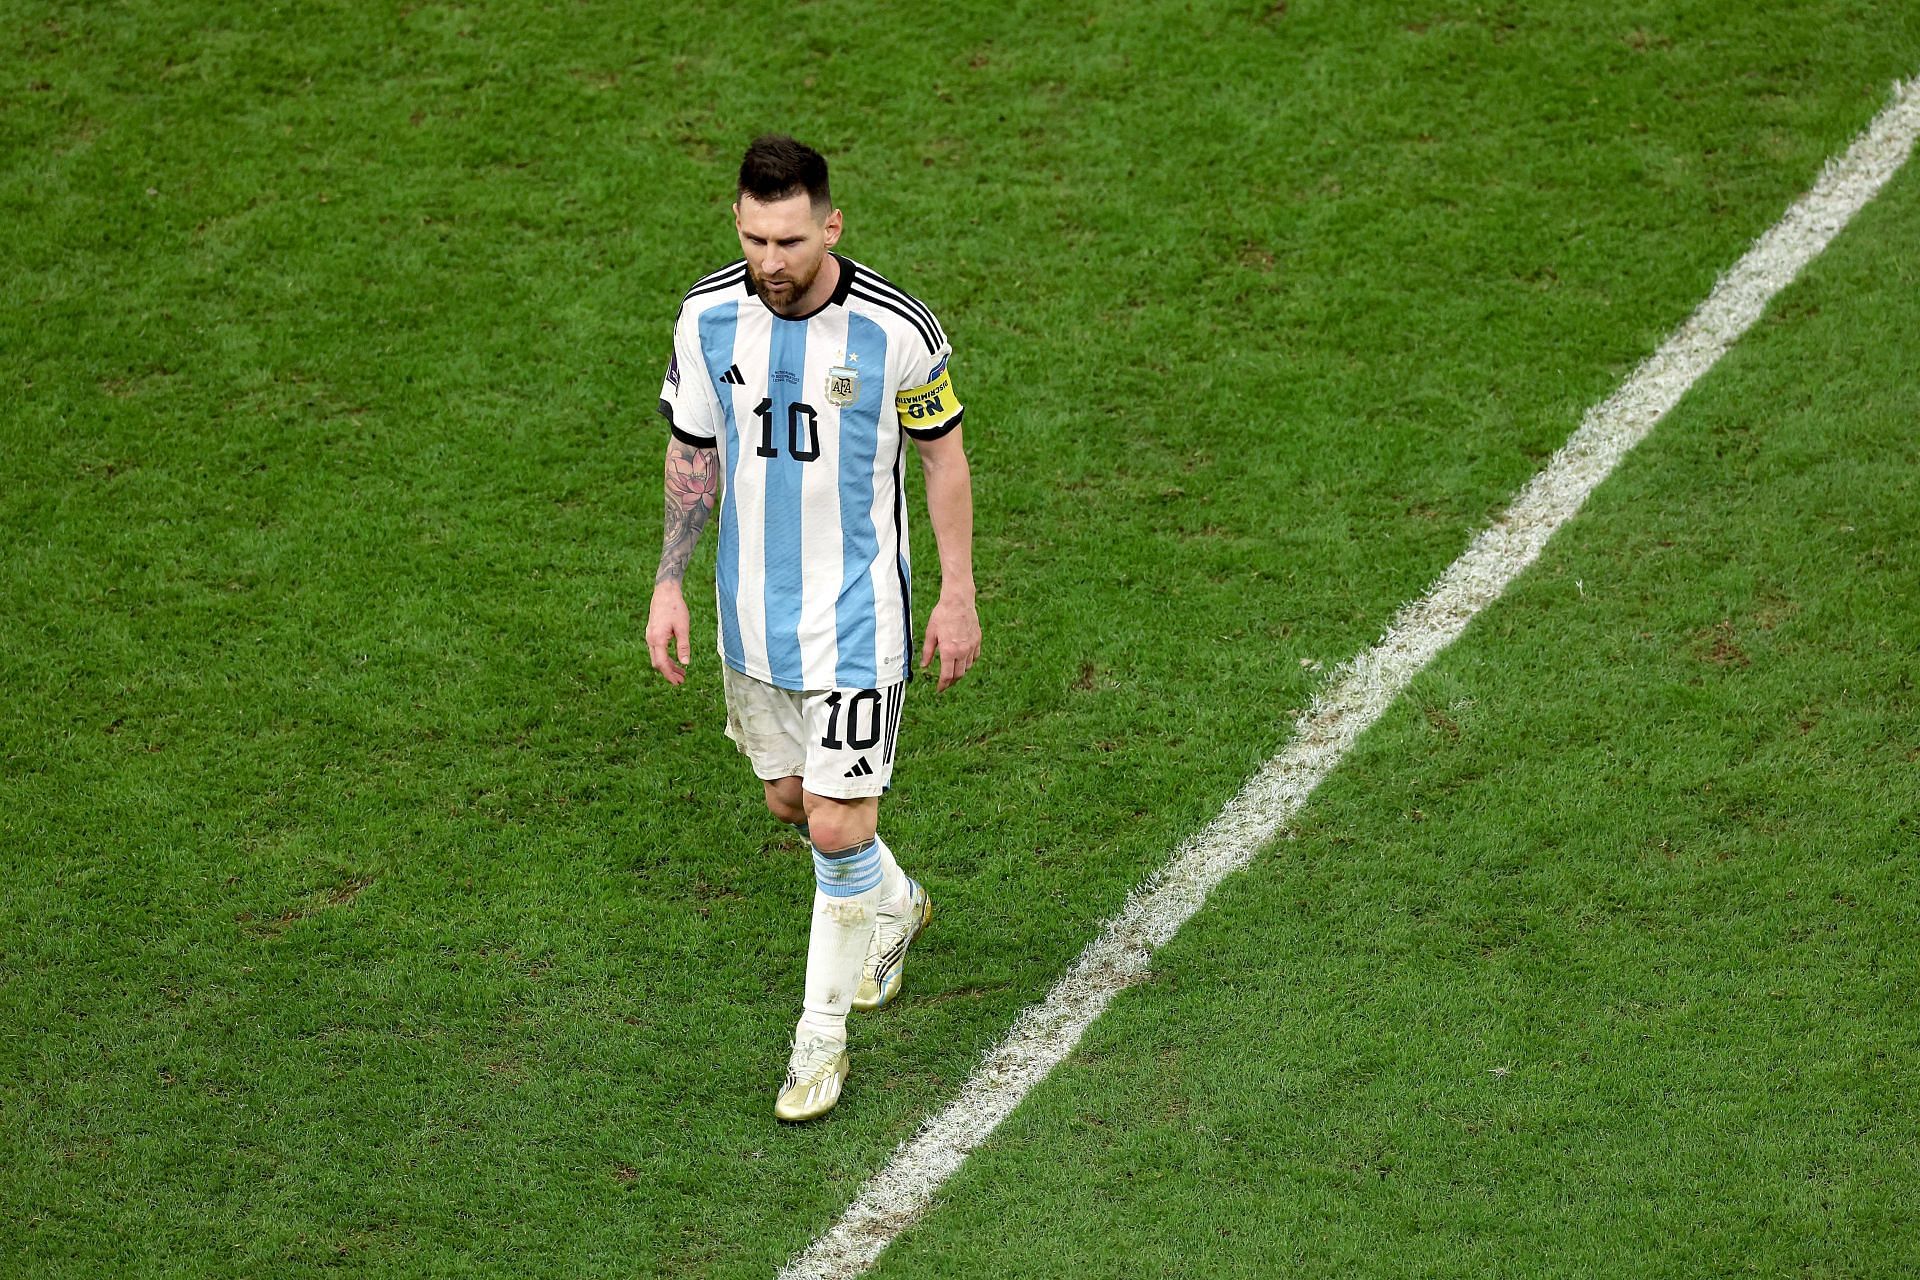 Lionel Messi has been on fire at the 2022 FIFA World Cup.